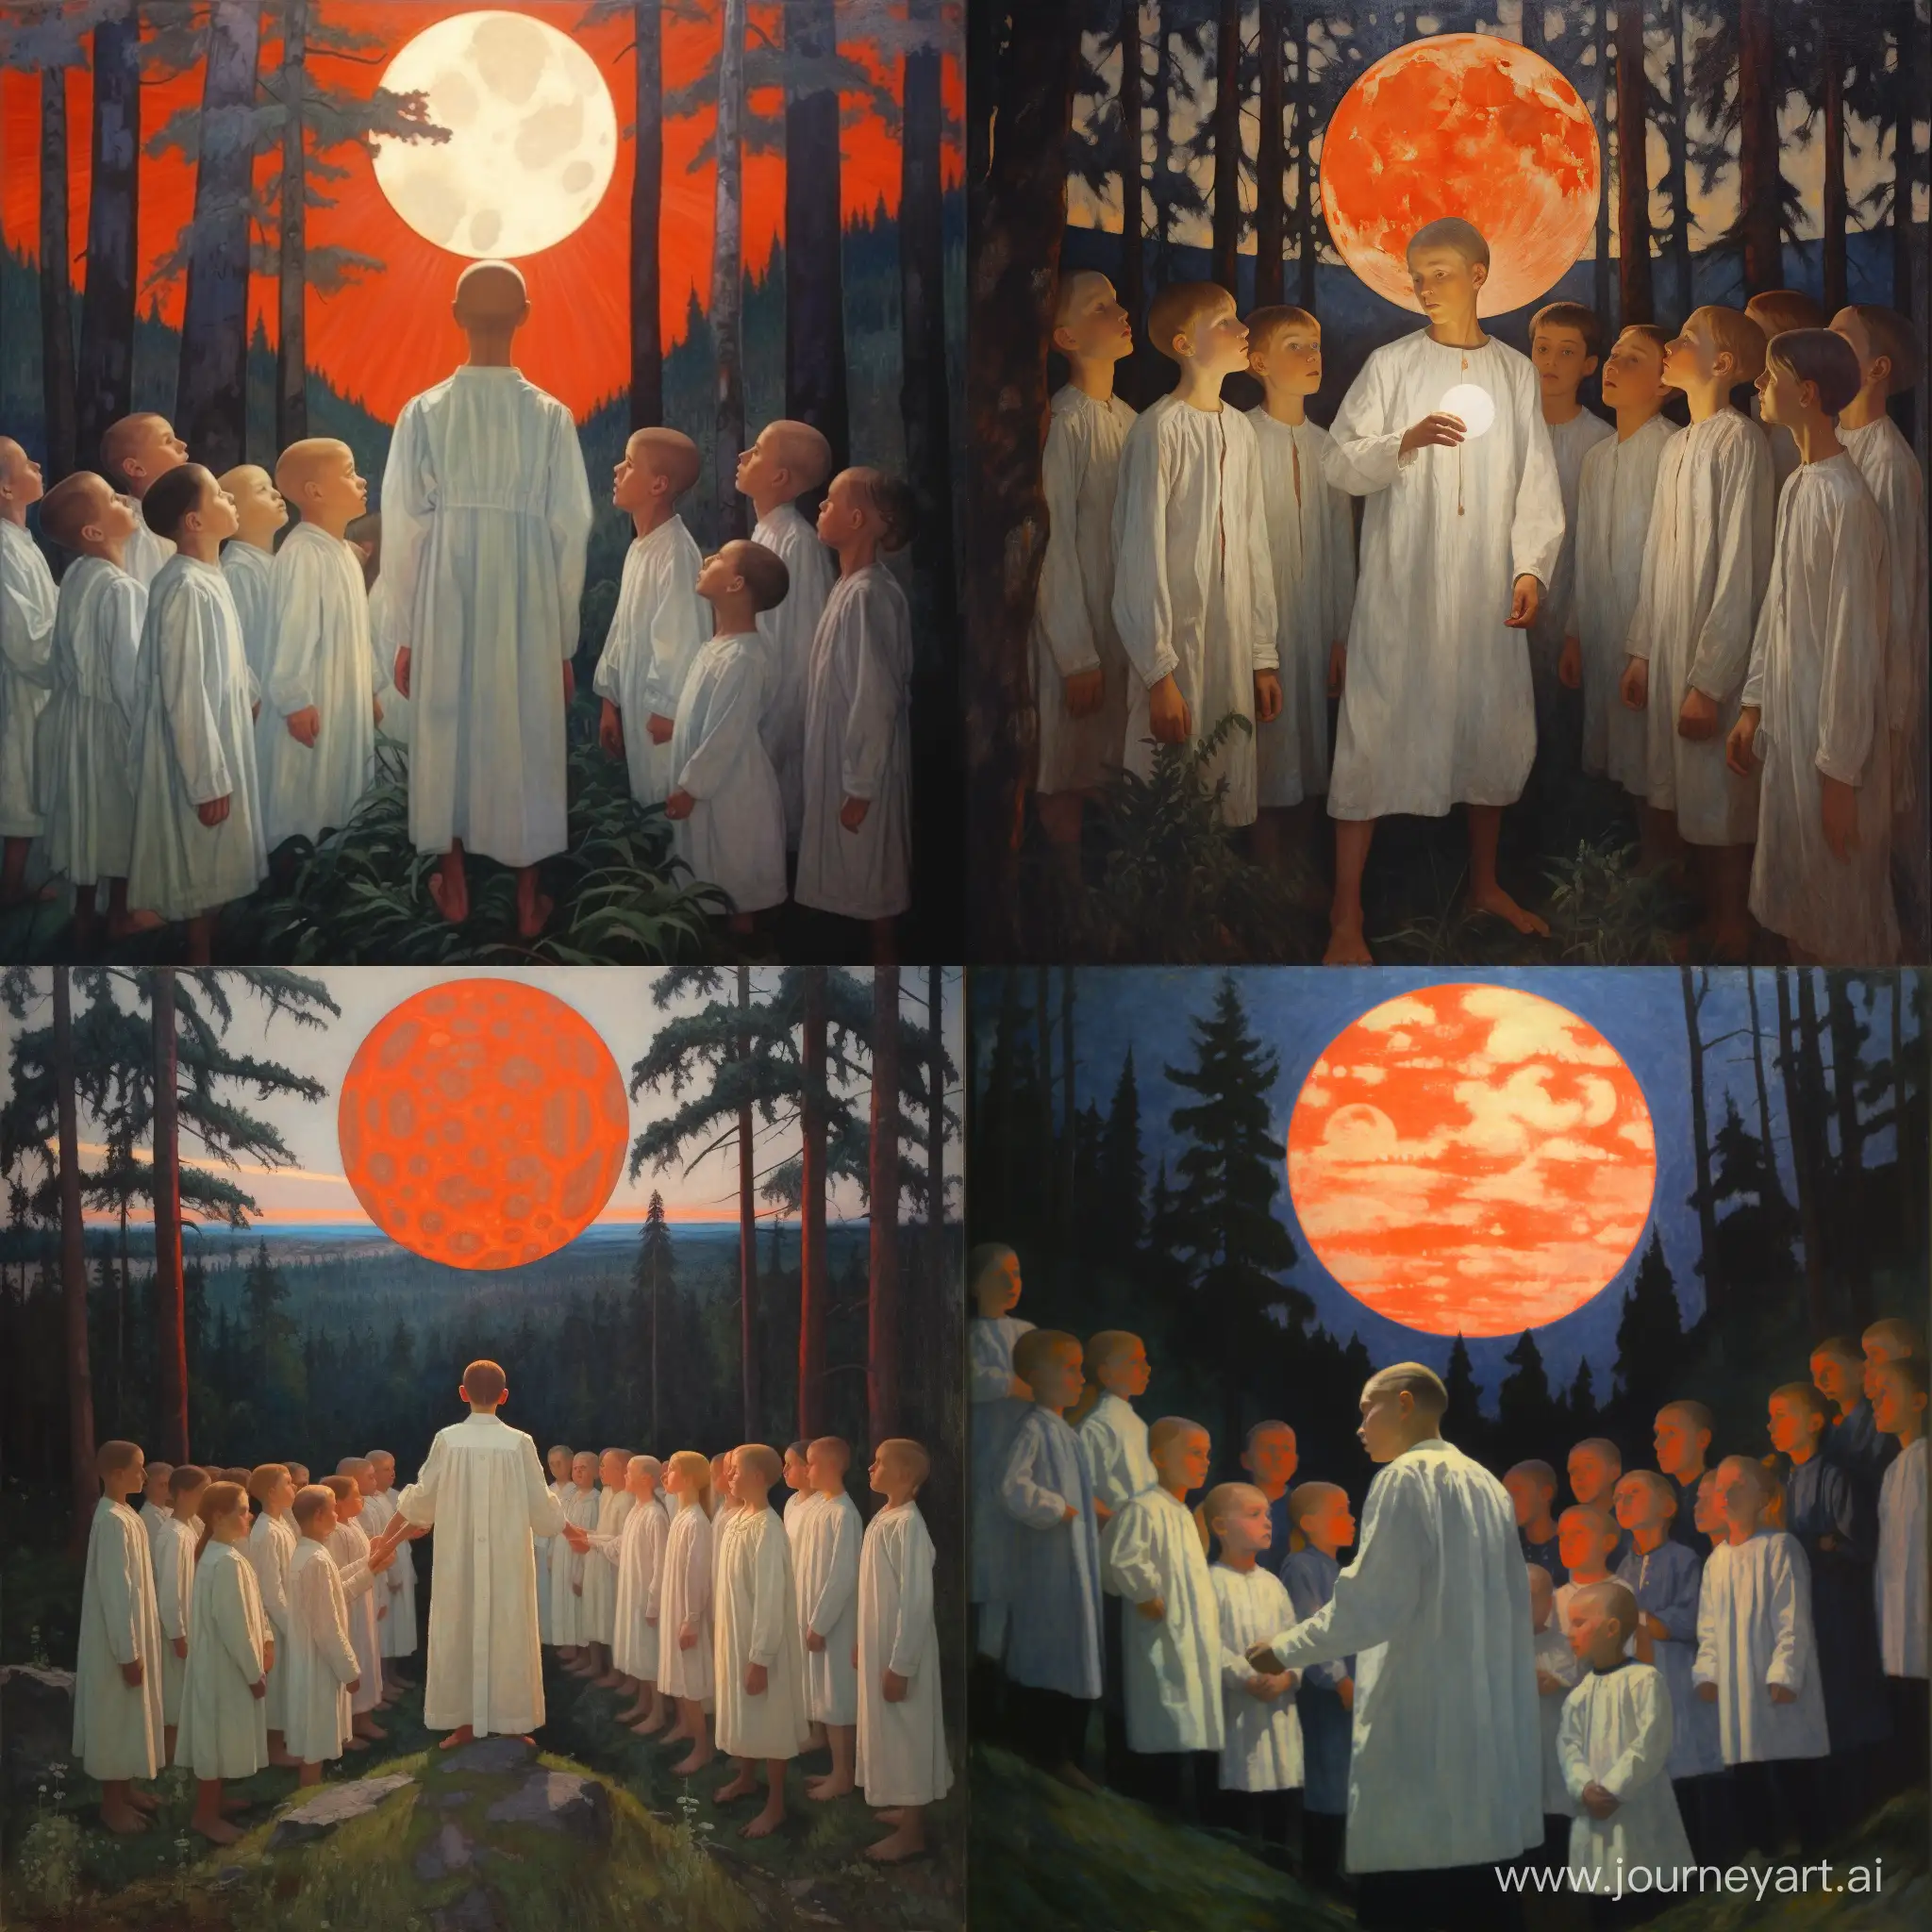 Enchanting-Night-Serenade-Childrens-Choir-on-Moonlit-Hill-with-Wolves-and-Pioneers